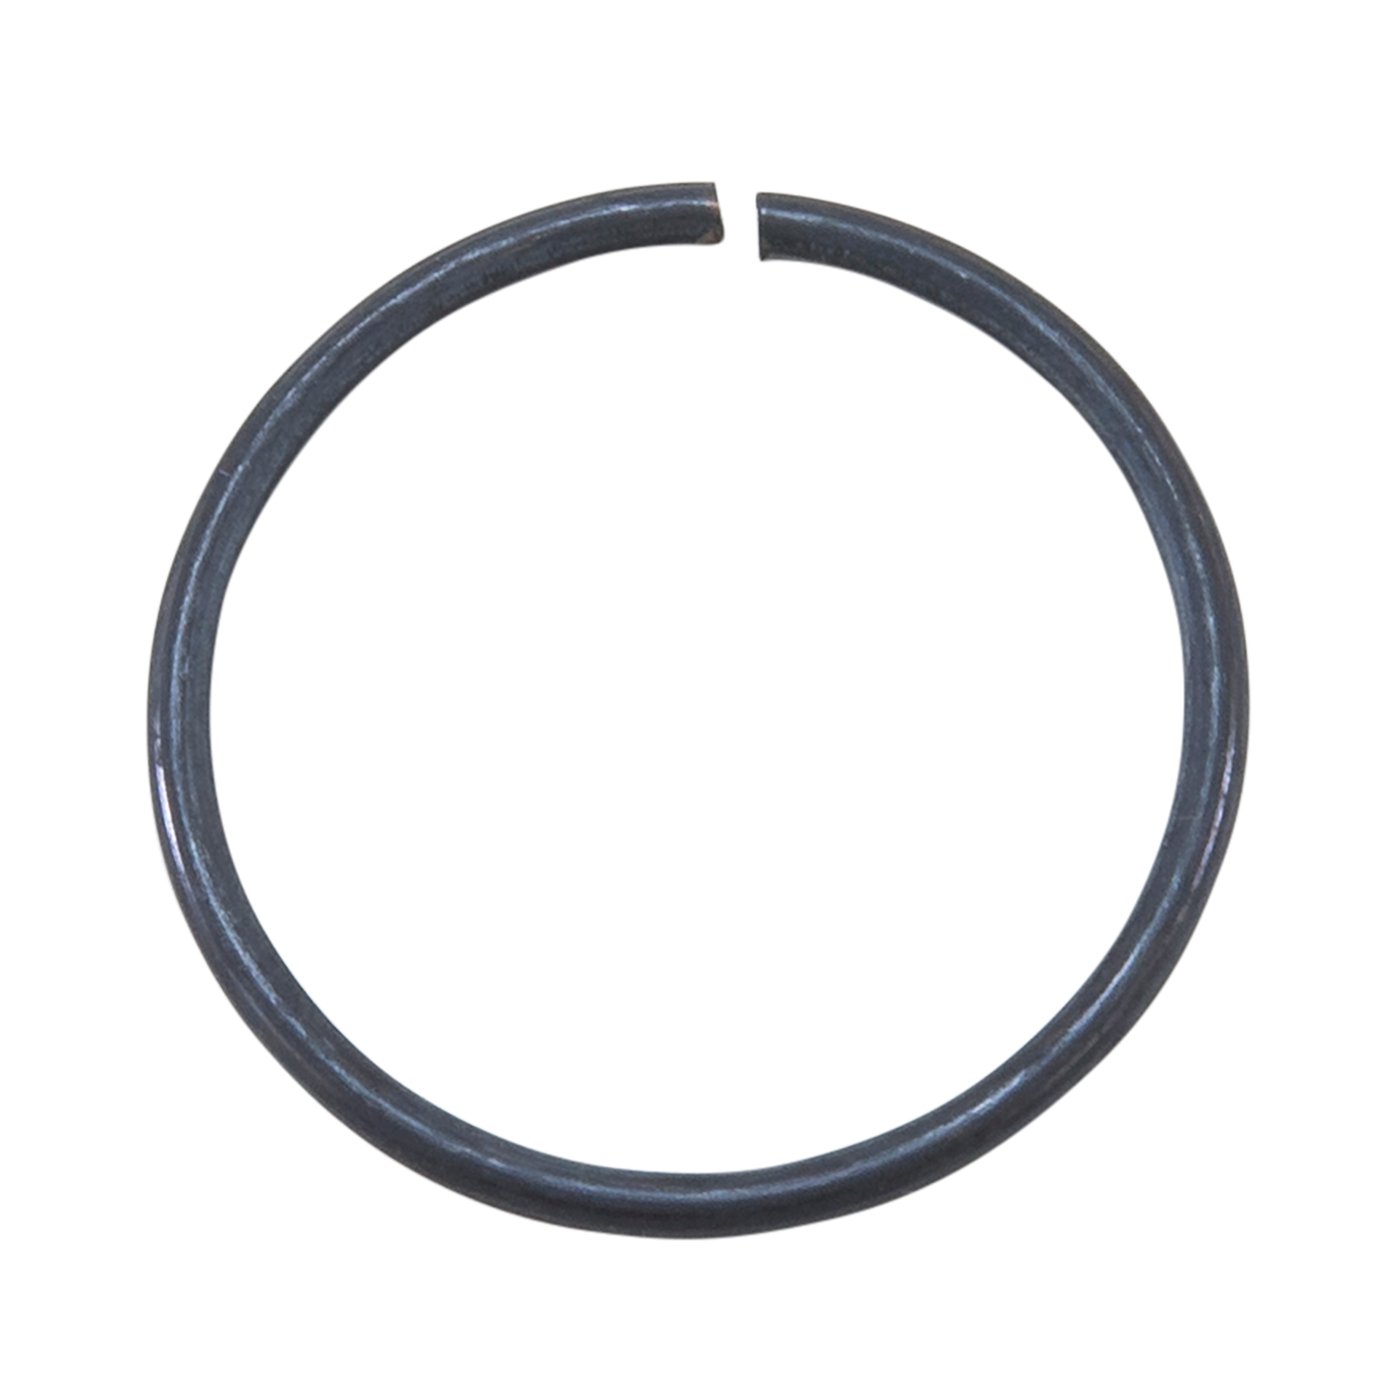 GM 9.25 in. Ifs Snap Ring For Outer Stub.